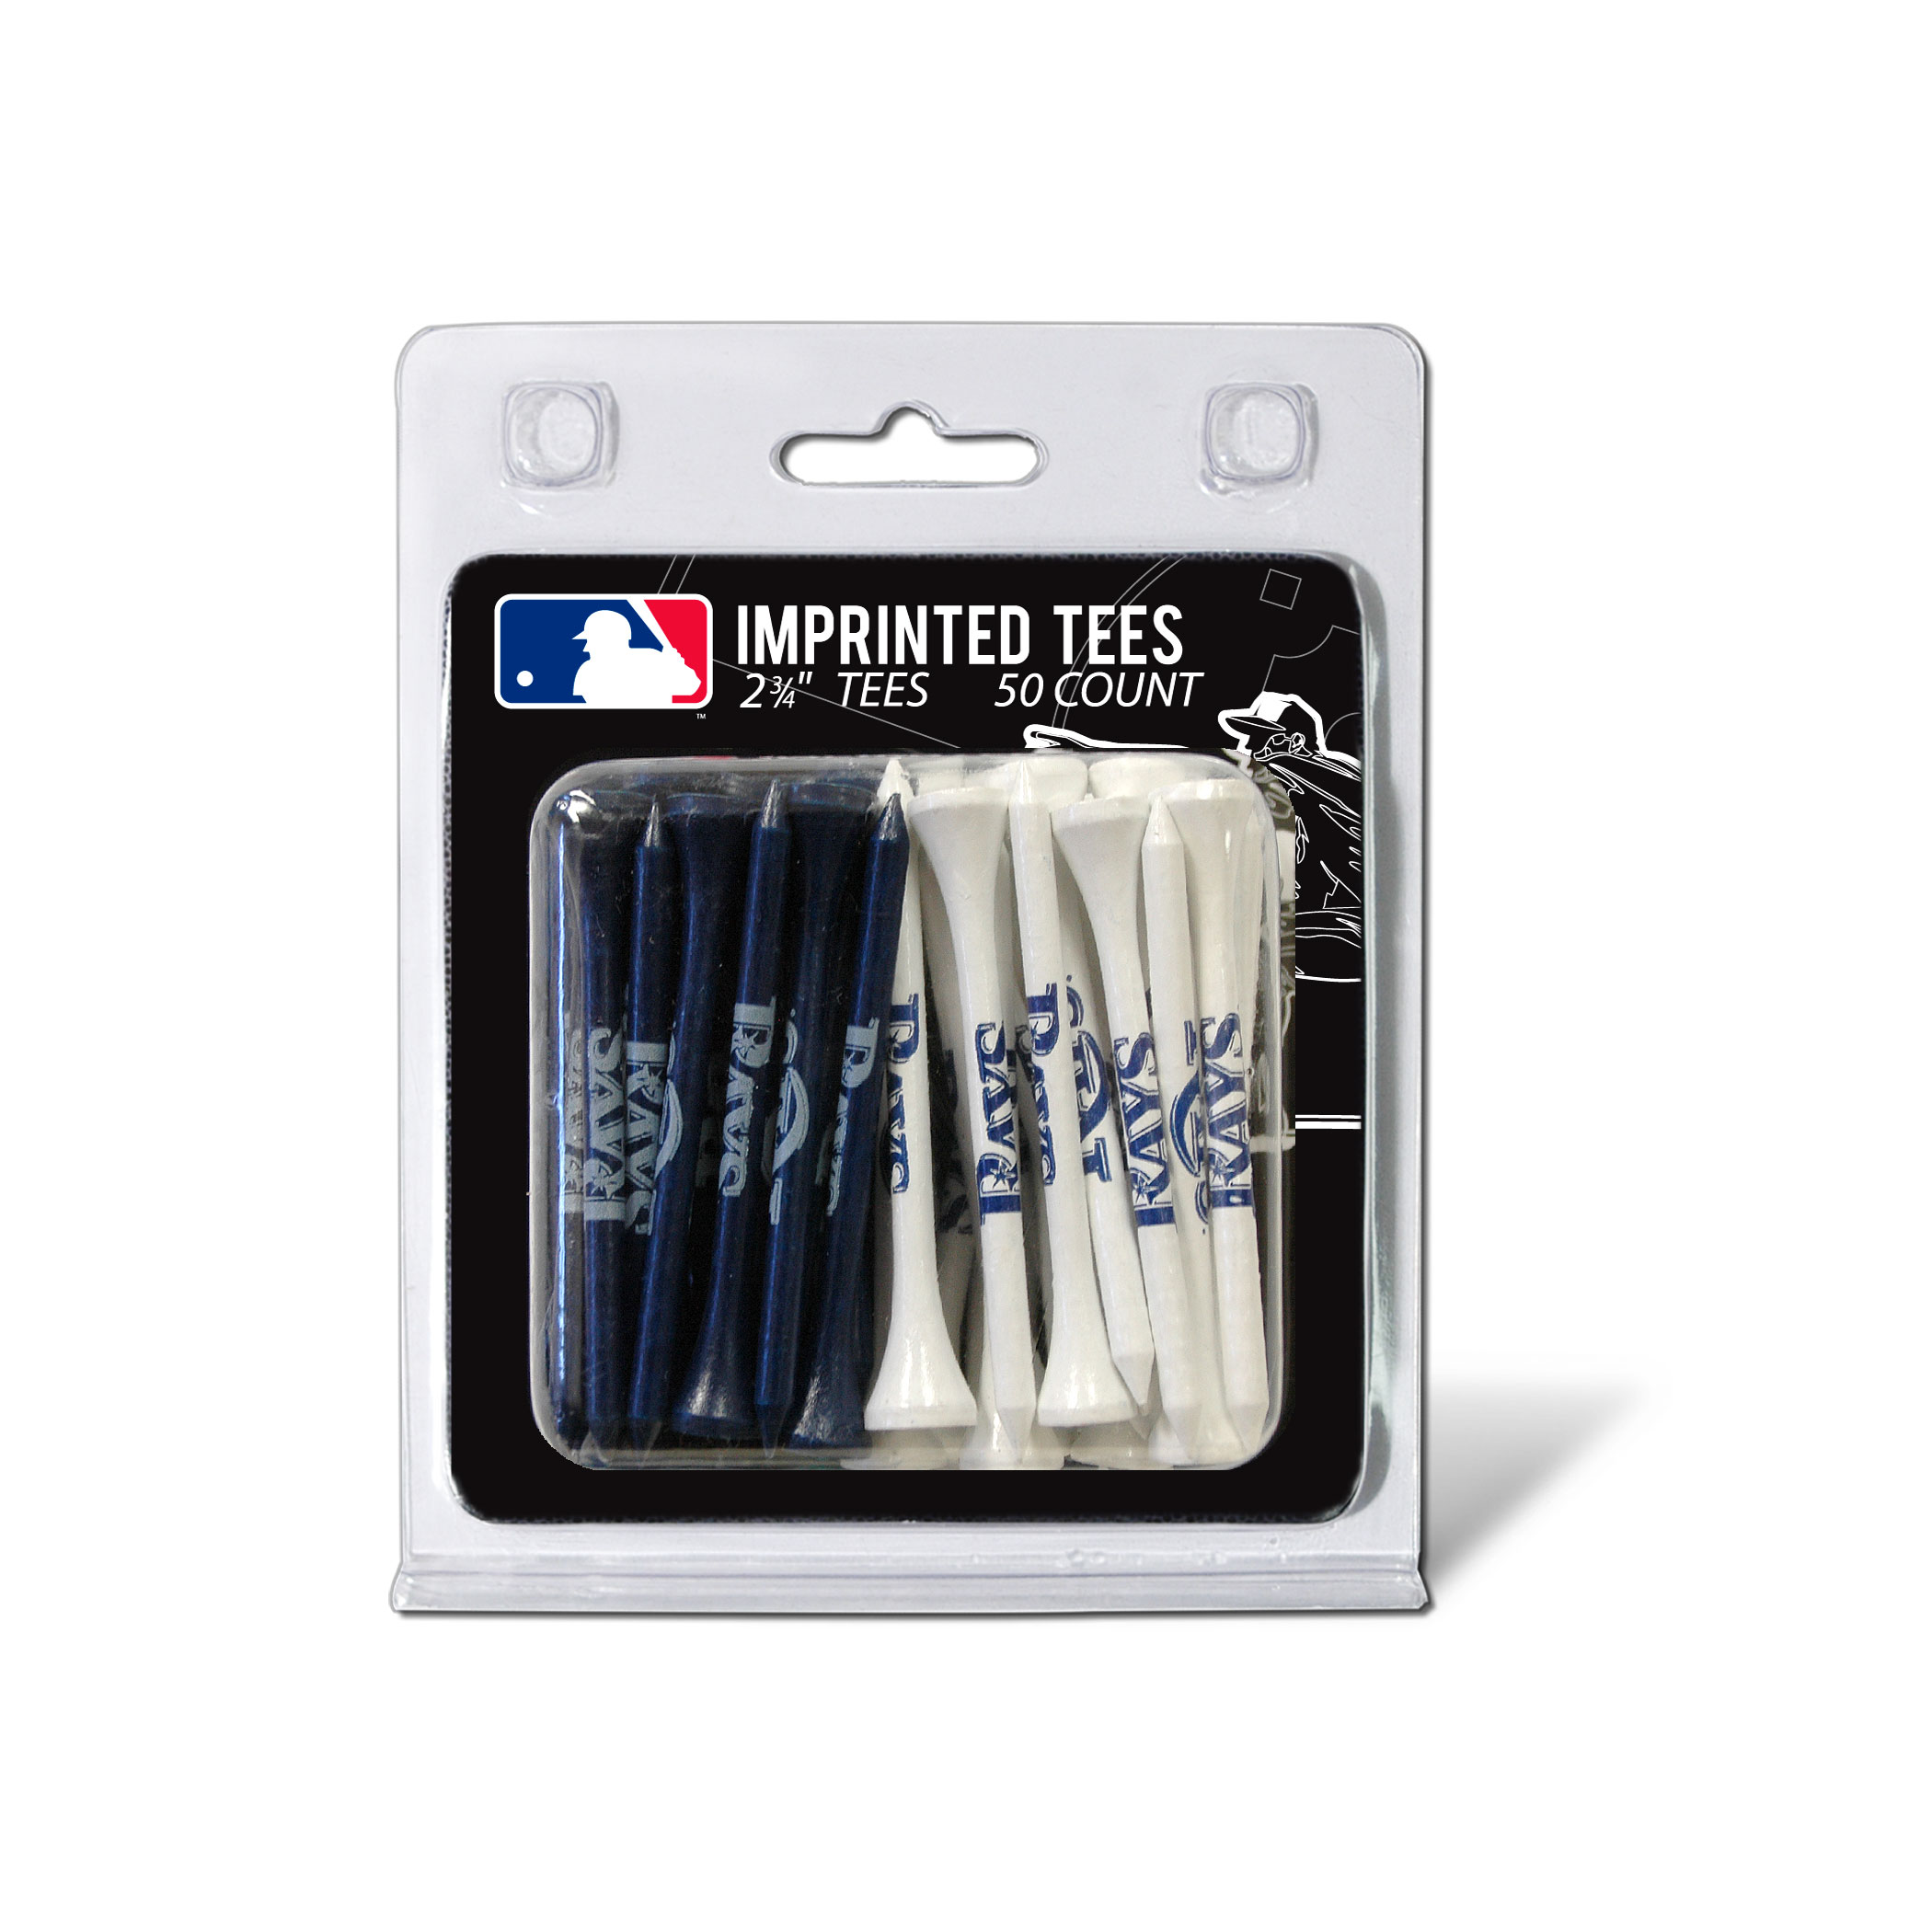 Tampa Bay Rays 50 Tee Pack